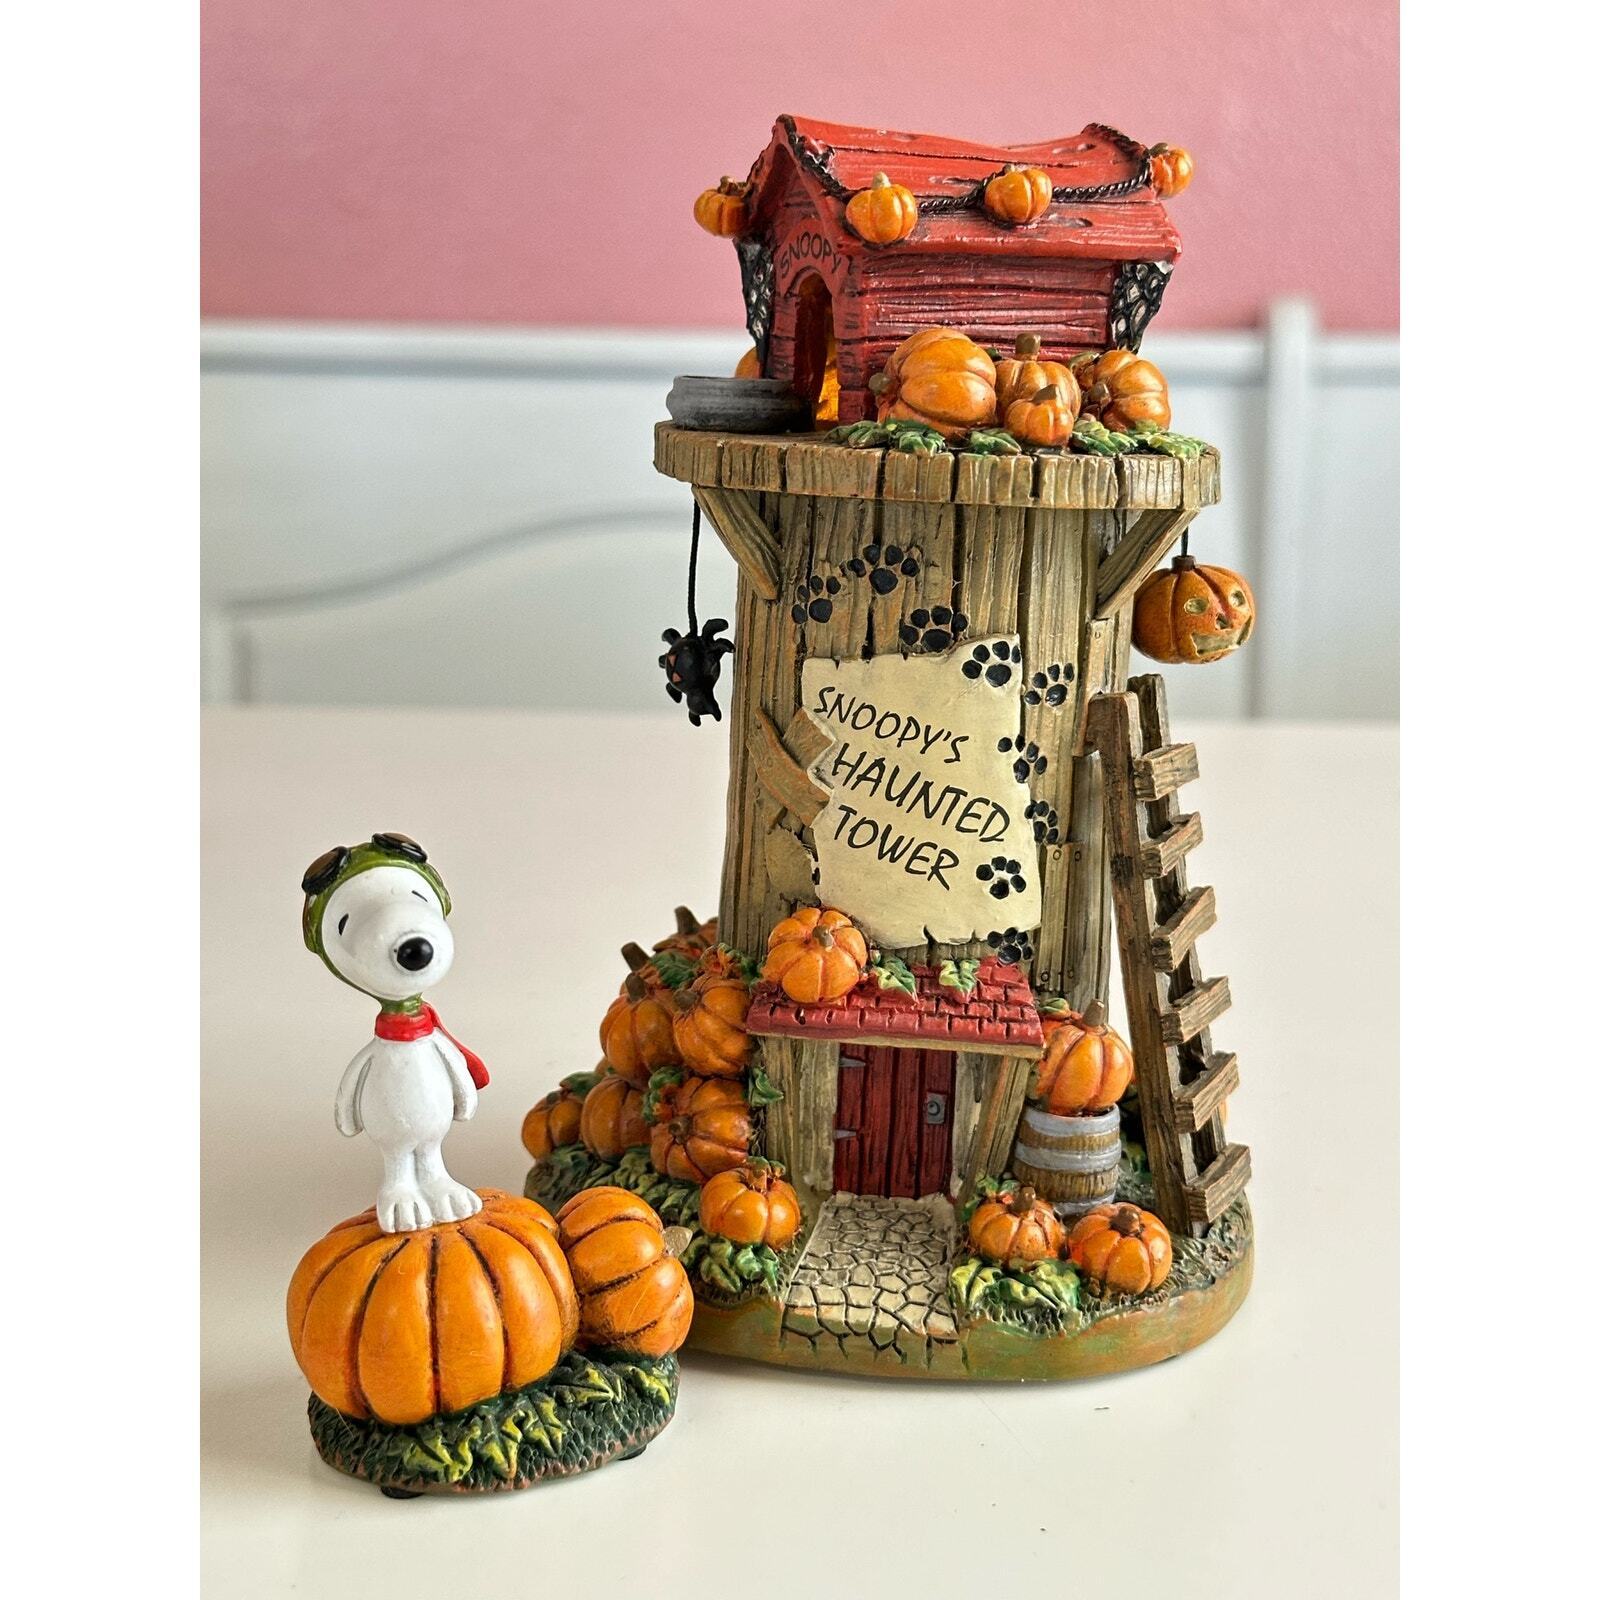 The Peanuts trick or treat Hawthorne village Snoopy\'s Haunted Tower 